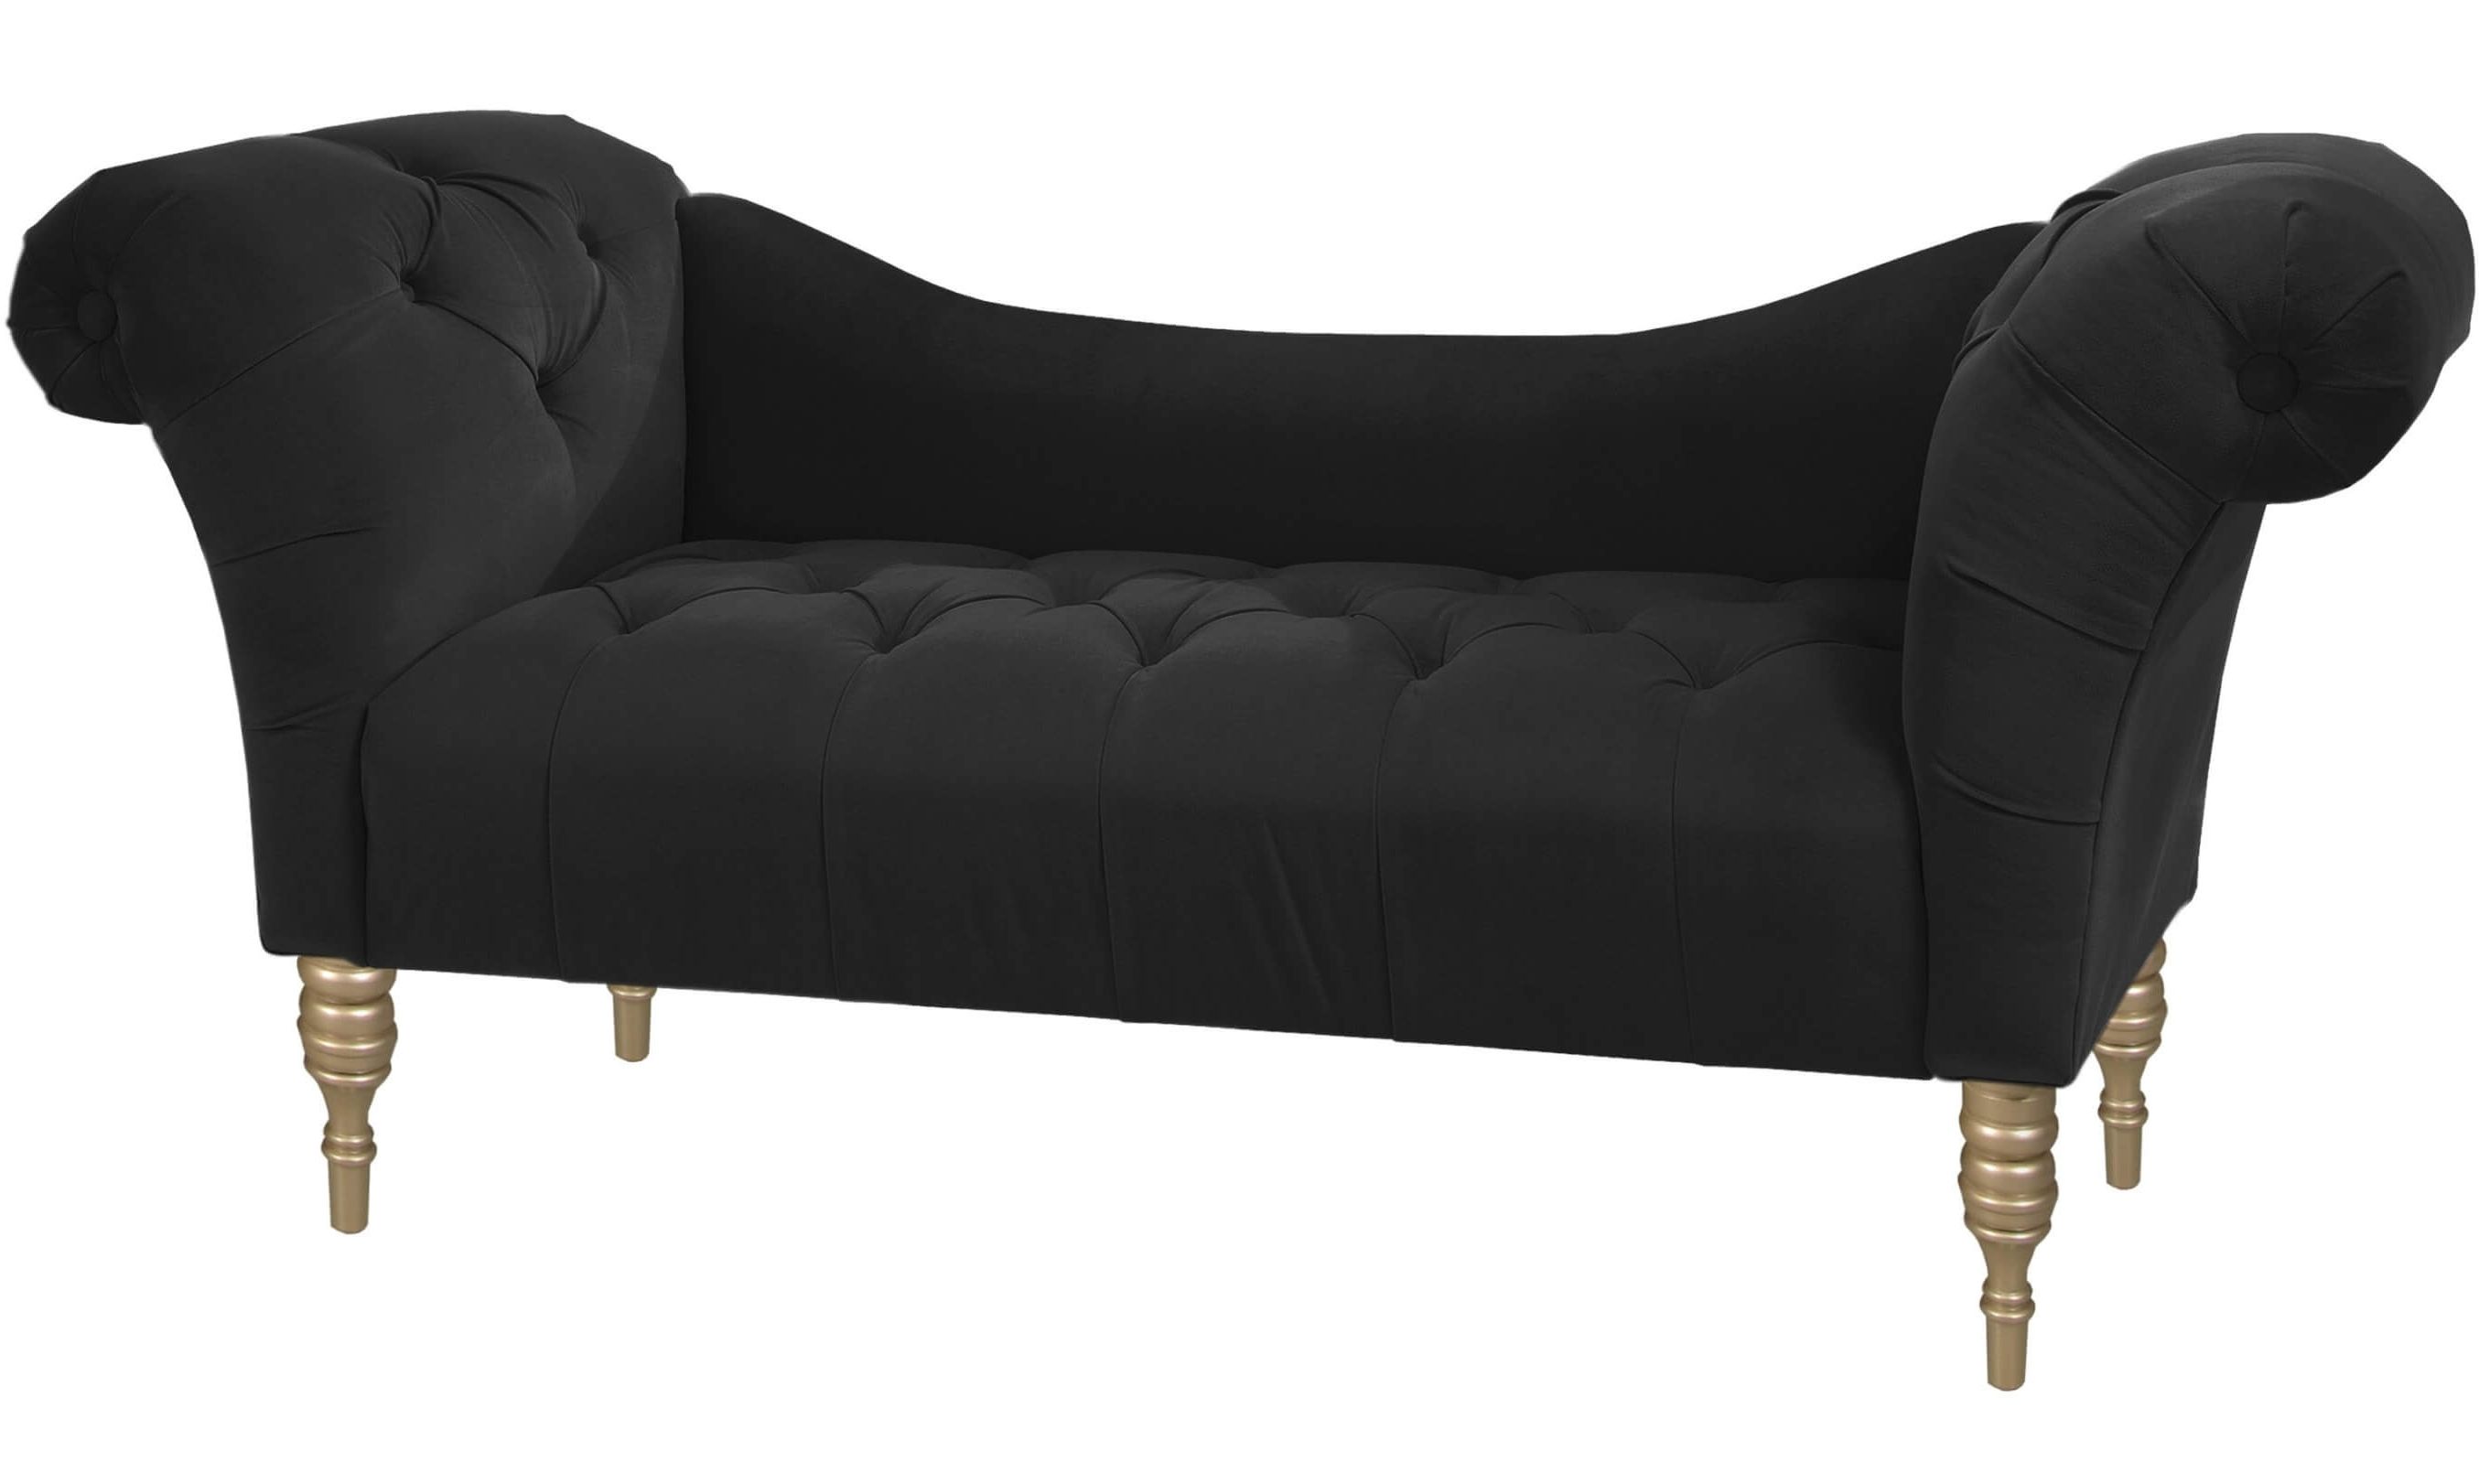 Best And Newest Skyline Chaise Lounges Inside Top 20 Types Of Black Chaise Lounges (buying Guide) – (View 7 of 15)